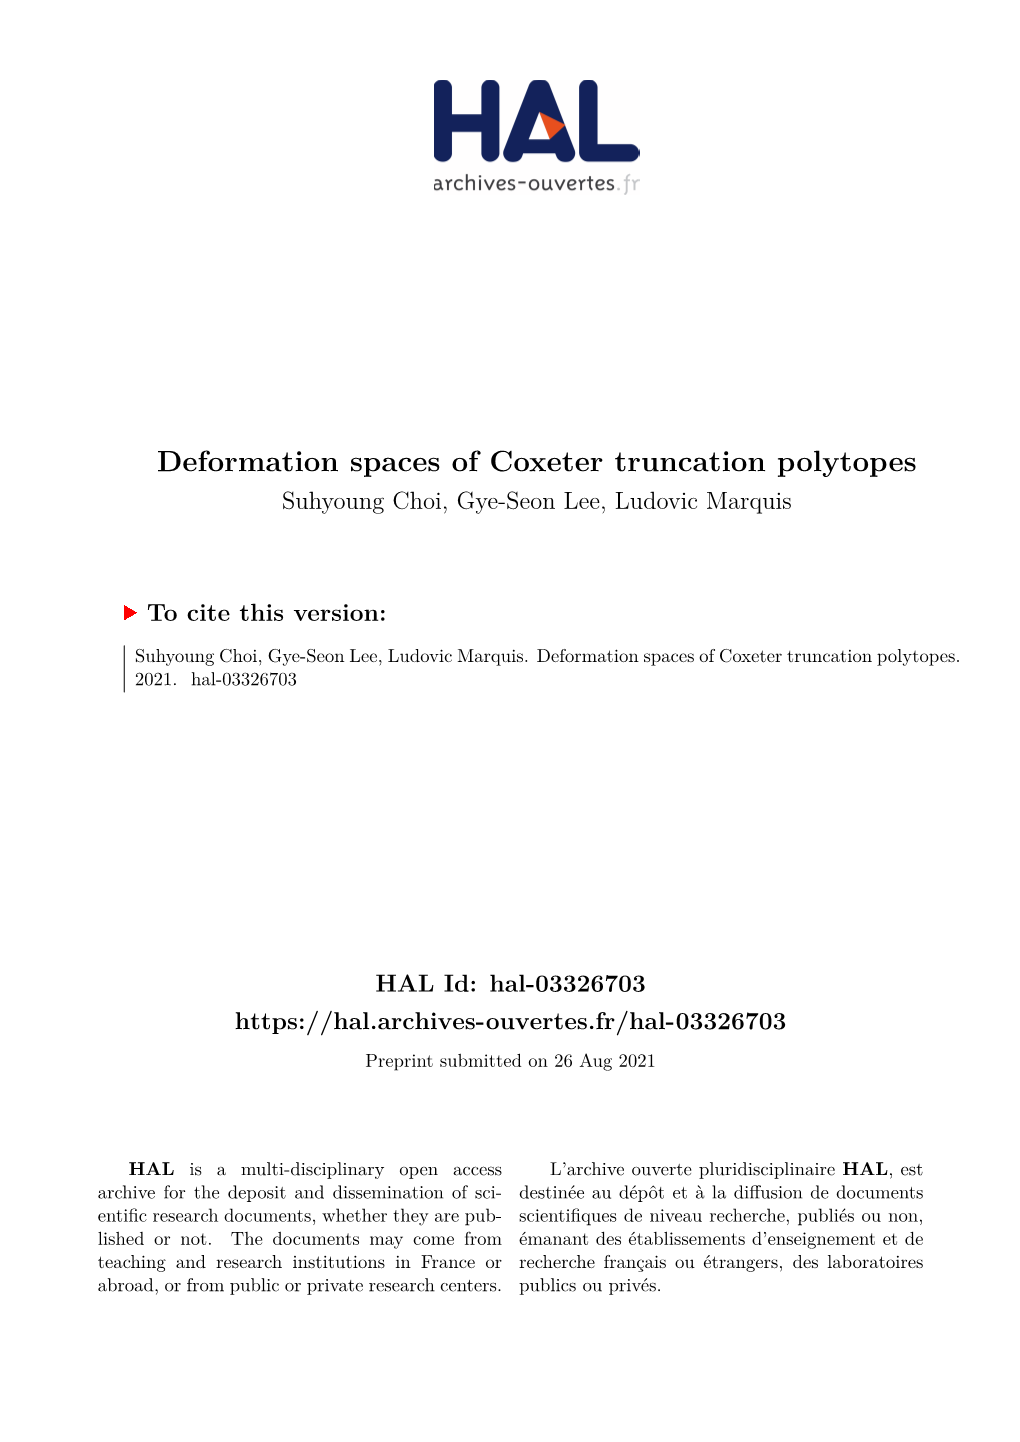 Deformation Spaces of Coxeter Truncation Polytopes Suhyoung Choi, Gye-Seon Lee, Ludovic Marquis